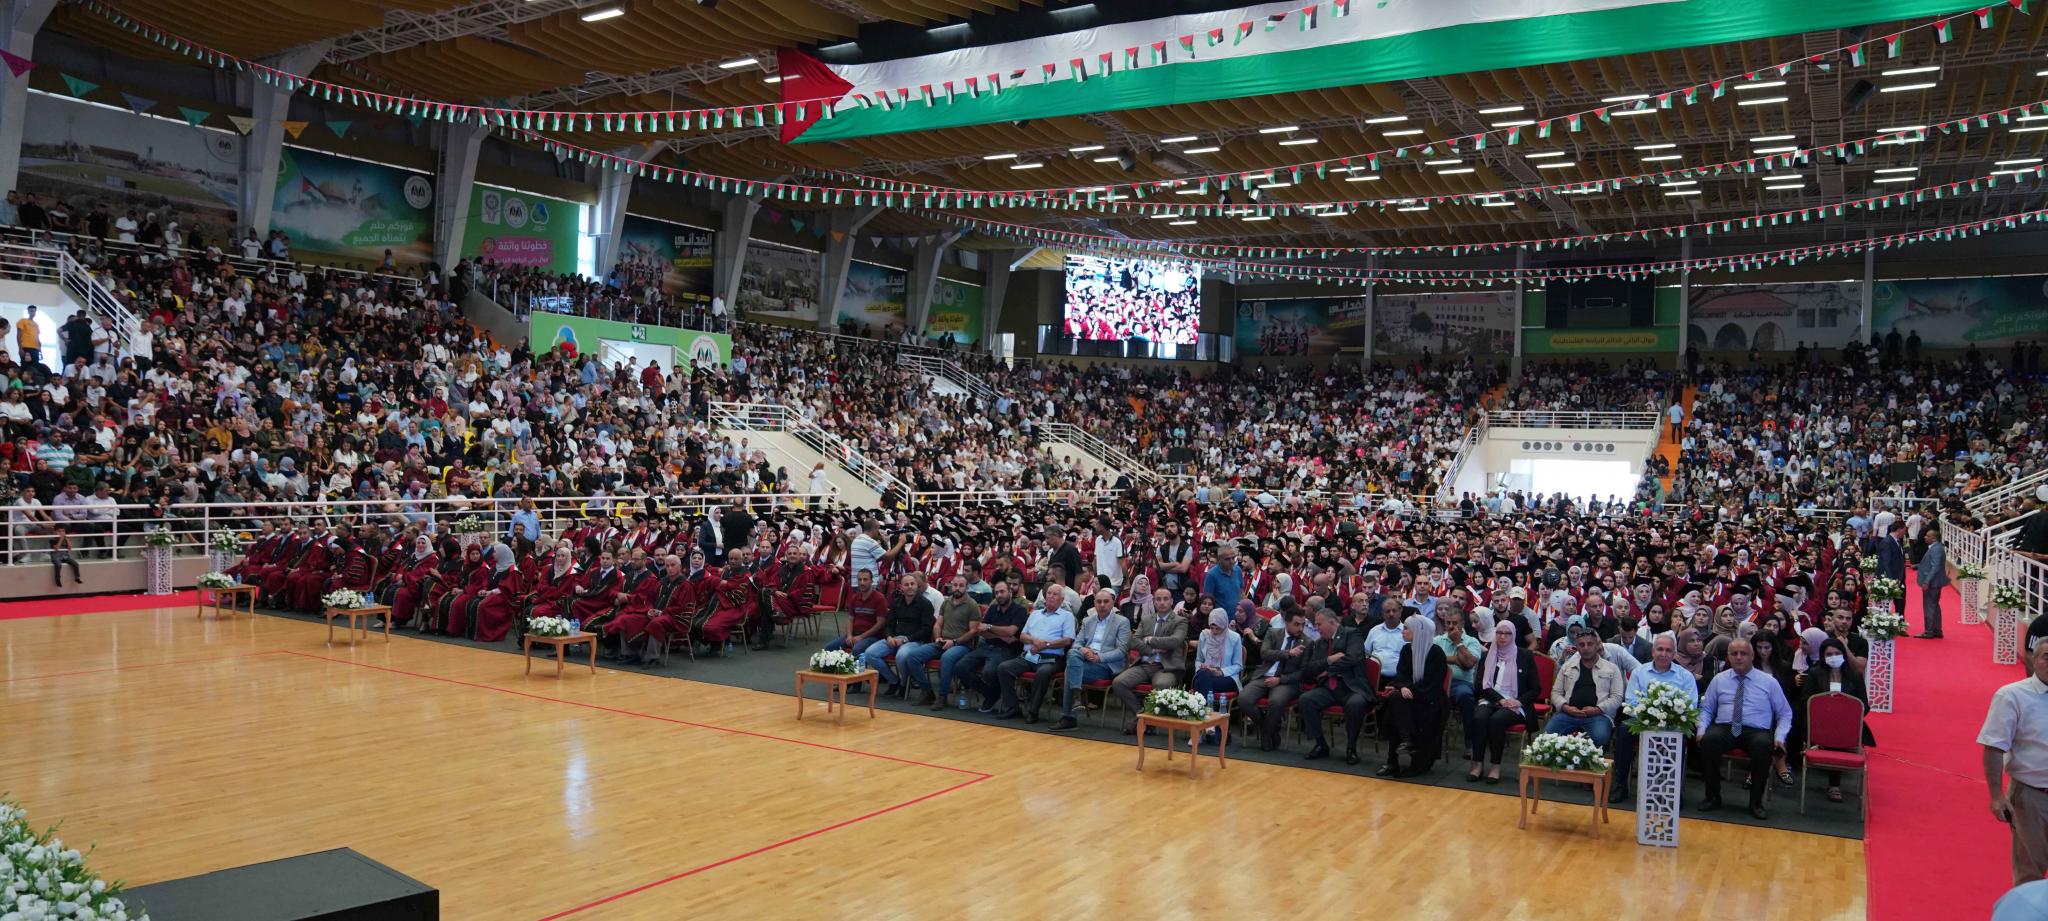 Graduation Ceremony of the 17th and 18th Cohorts